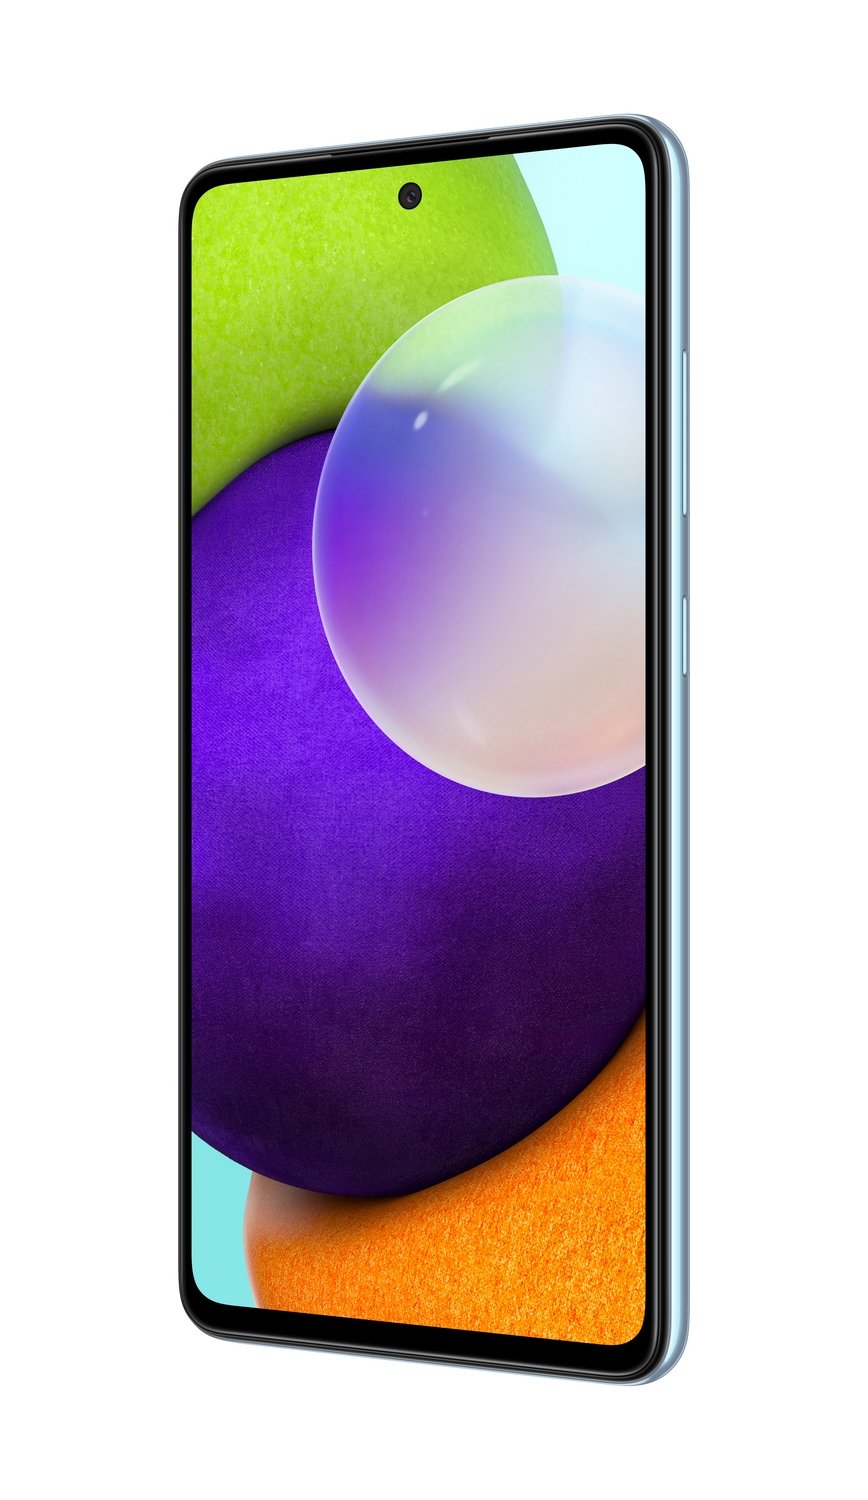 Samsung Galaxy A52 specs, review, release date - PhonesData